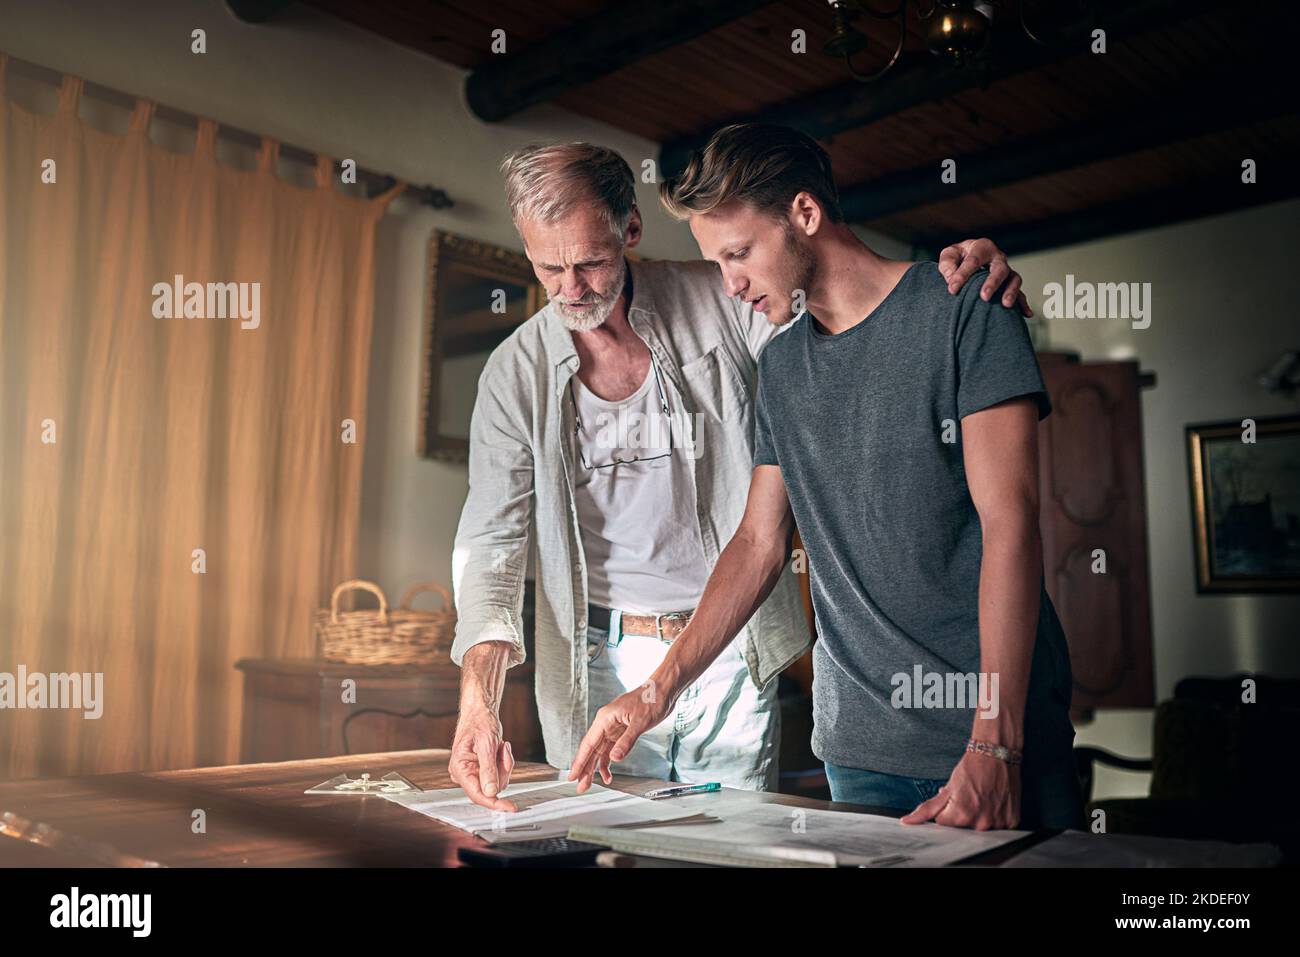 Dad is happy to help him perfect his design. a father and his son working on a design for their family business at home. Stock Photo